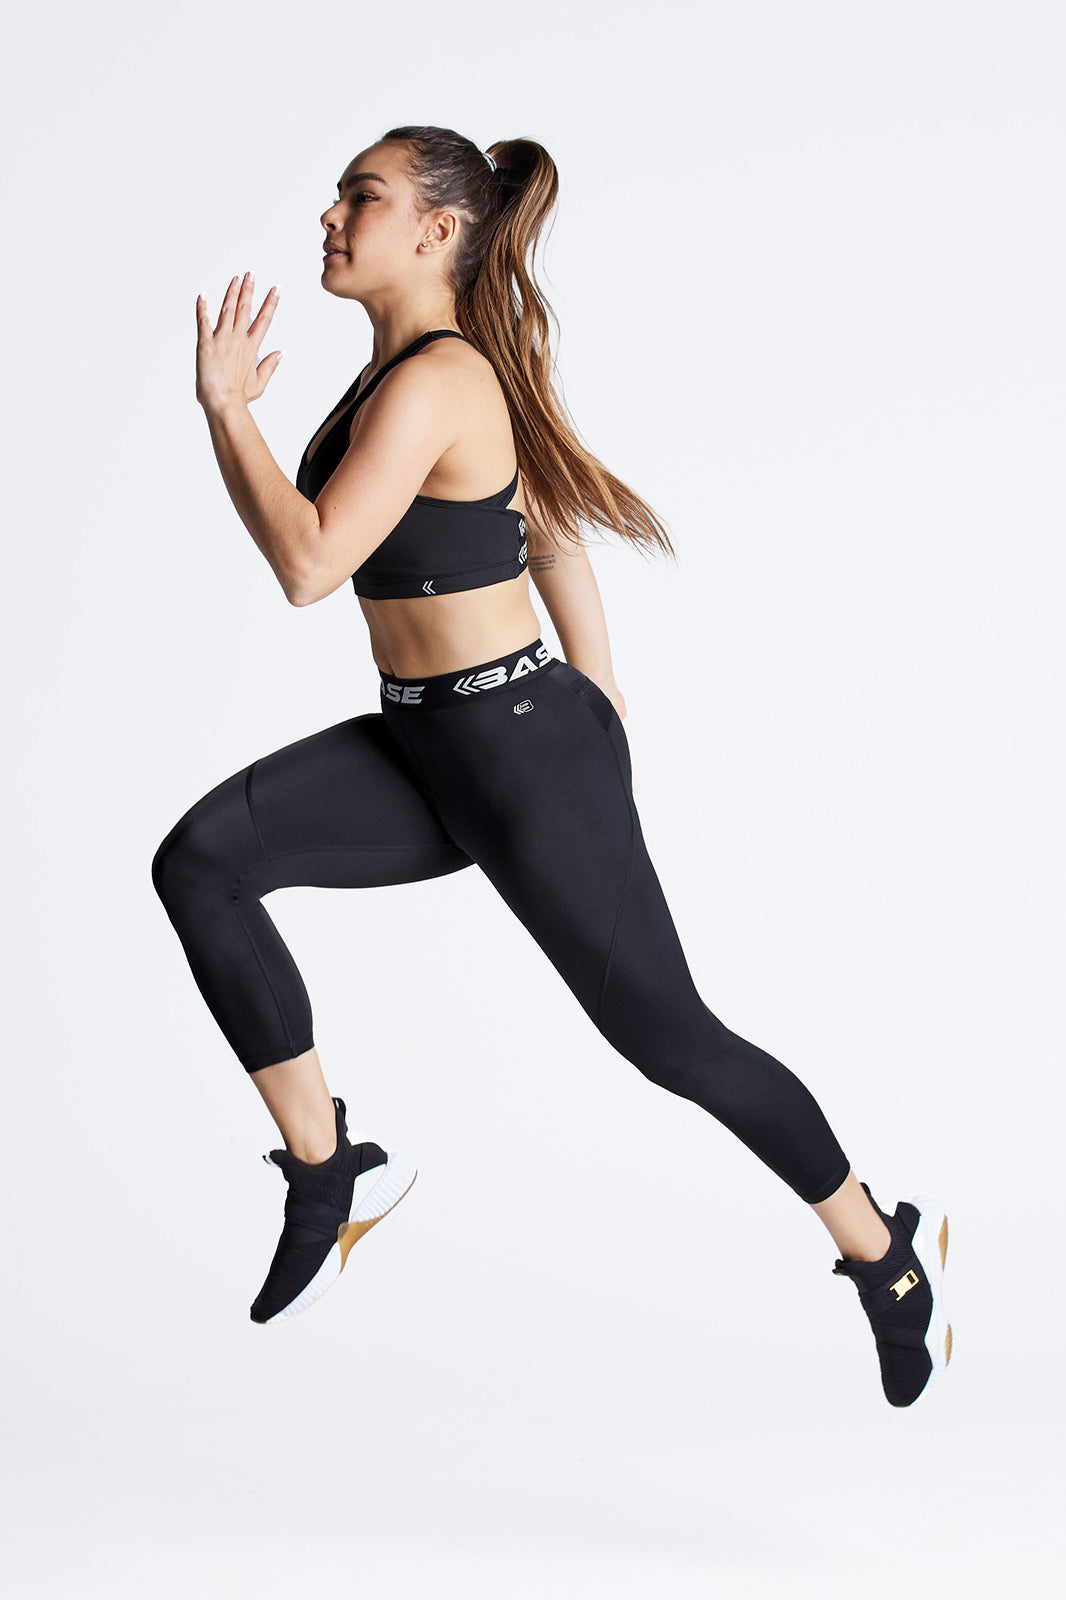 Btoperform Guardian Full Graphic Compression Leggings FY-132